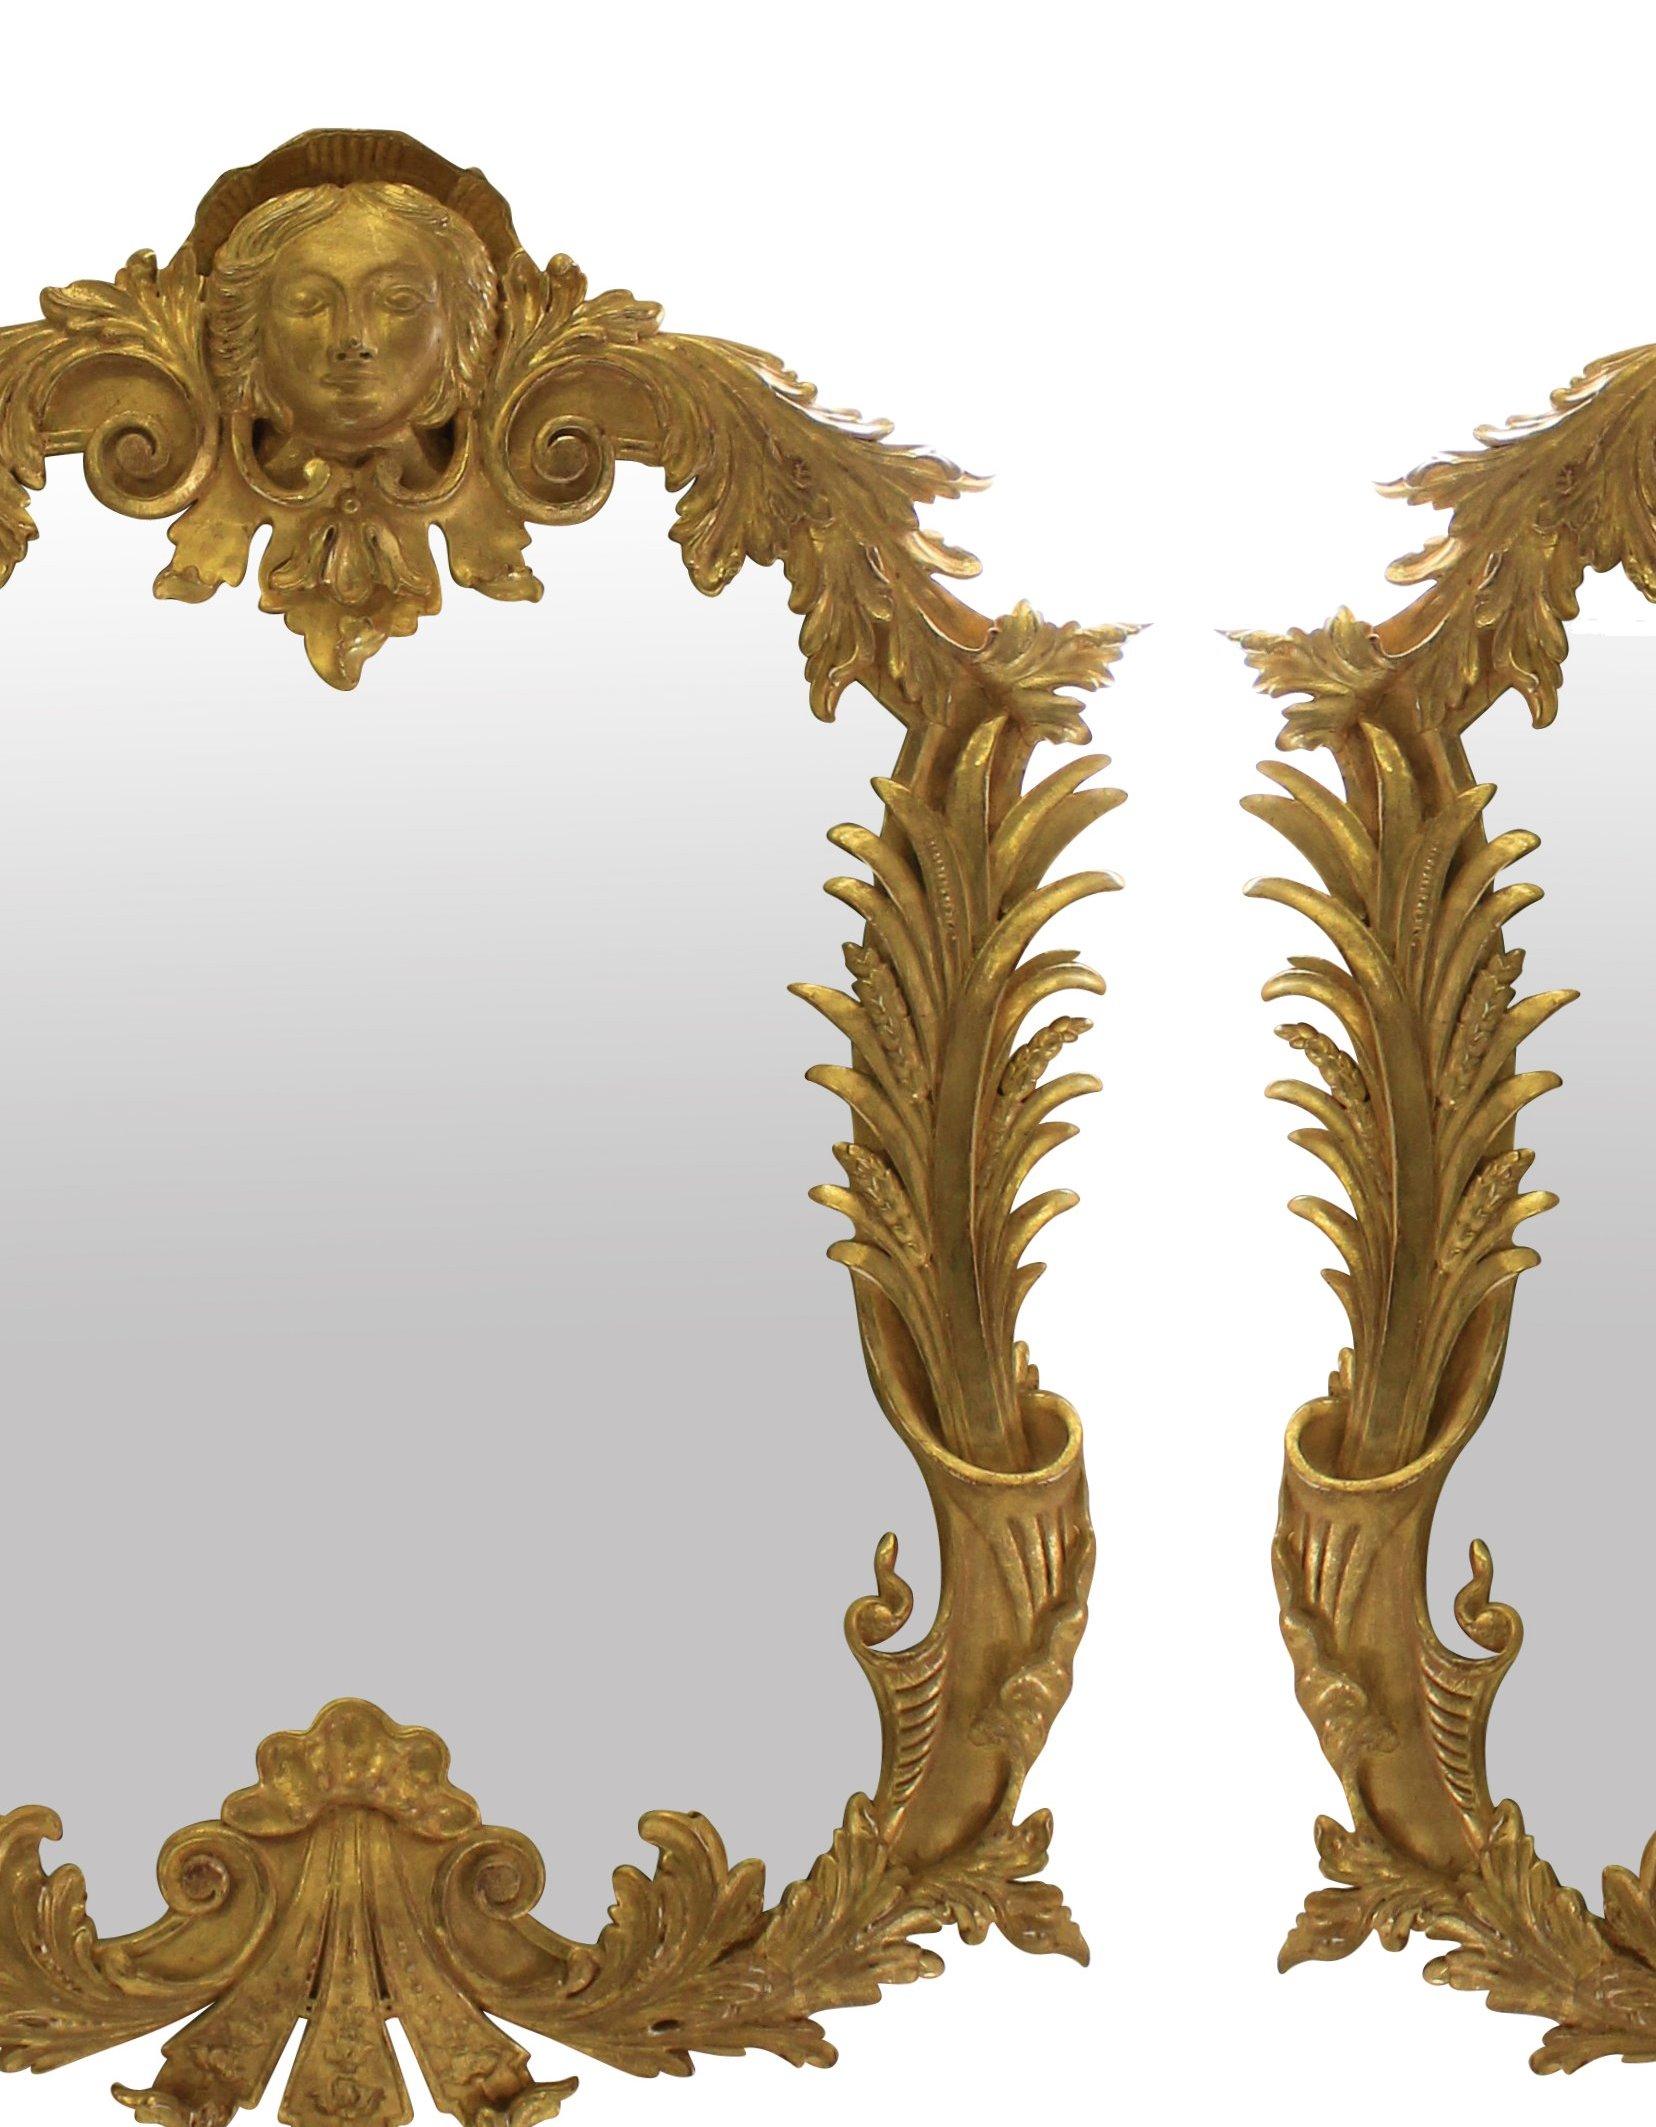 Pair of Large George III Style Giltwood Mirrors 3